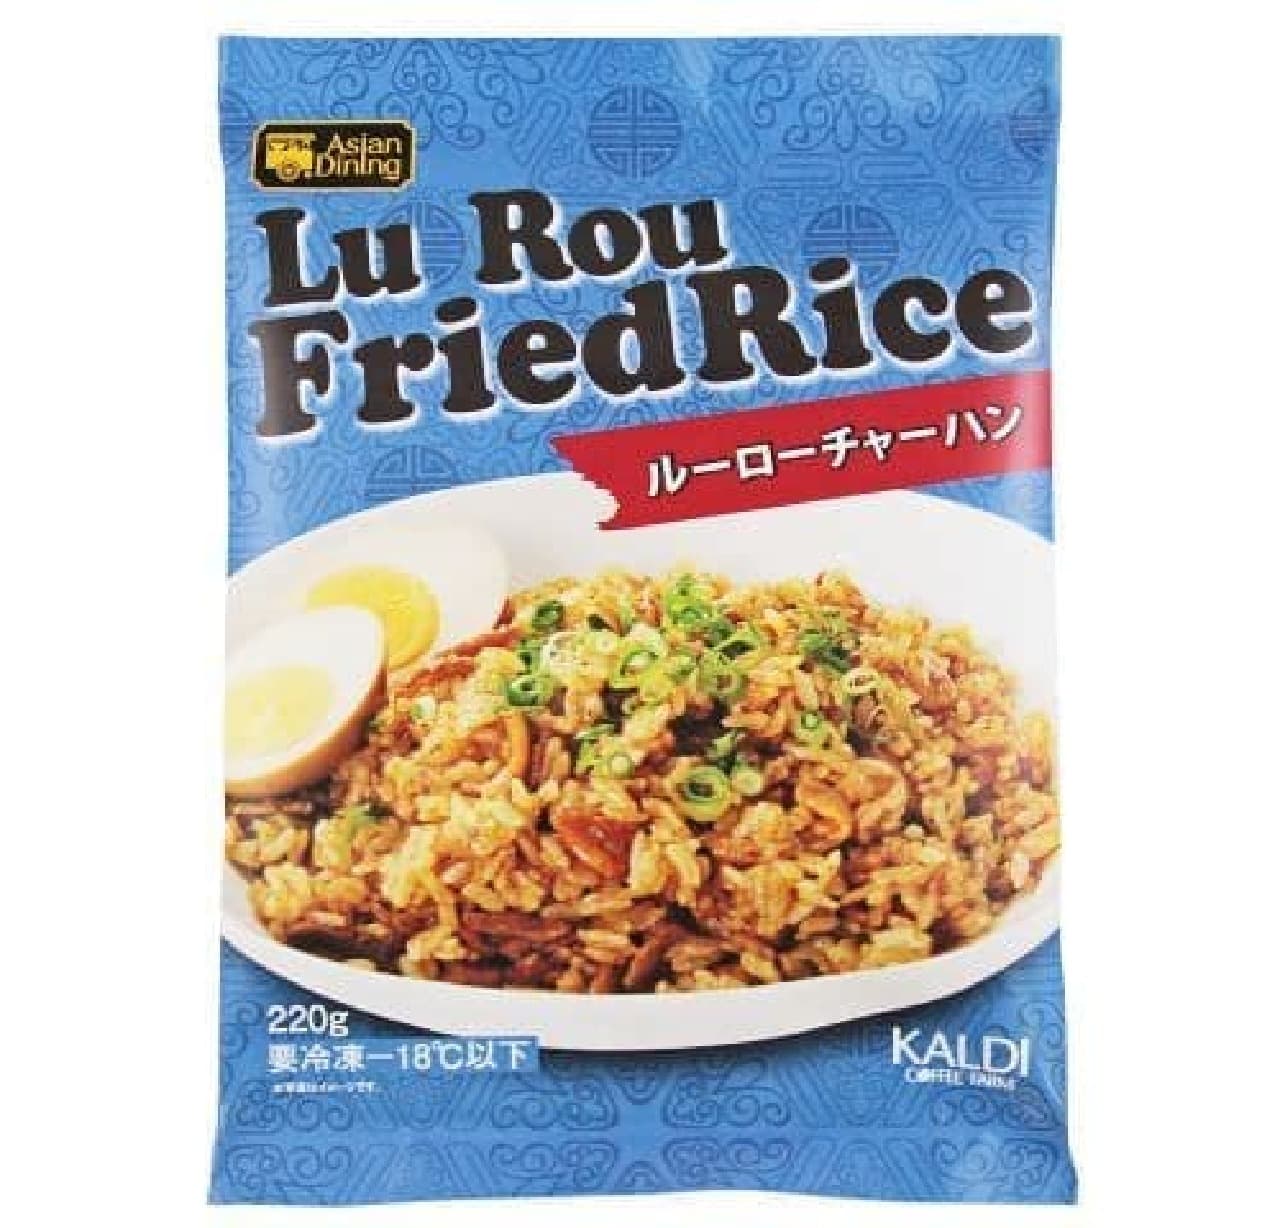 KALDI "Asian Dining Roulo Fried Rice (Frozen)"